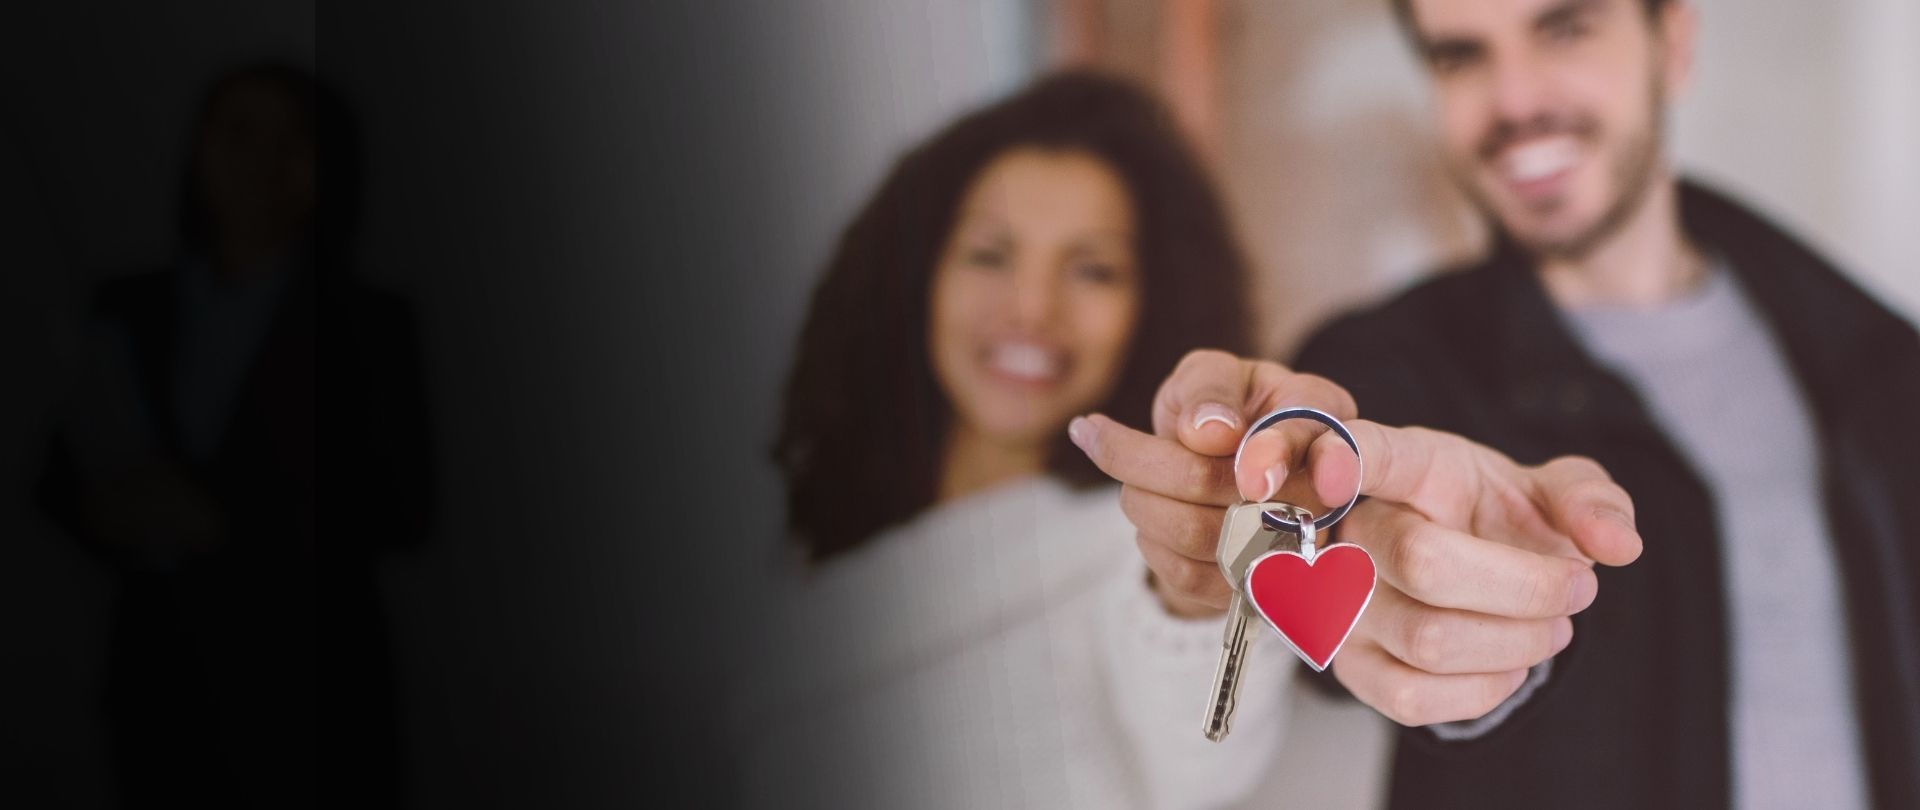 Happy couple in new home holding key ring with red heart and house key bought through the best mortgage lender in Denver.